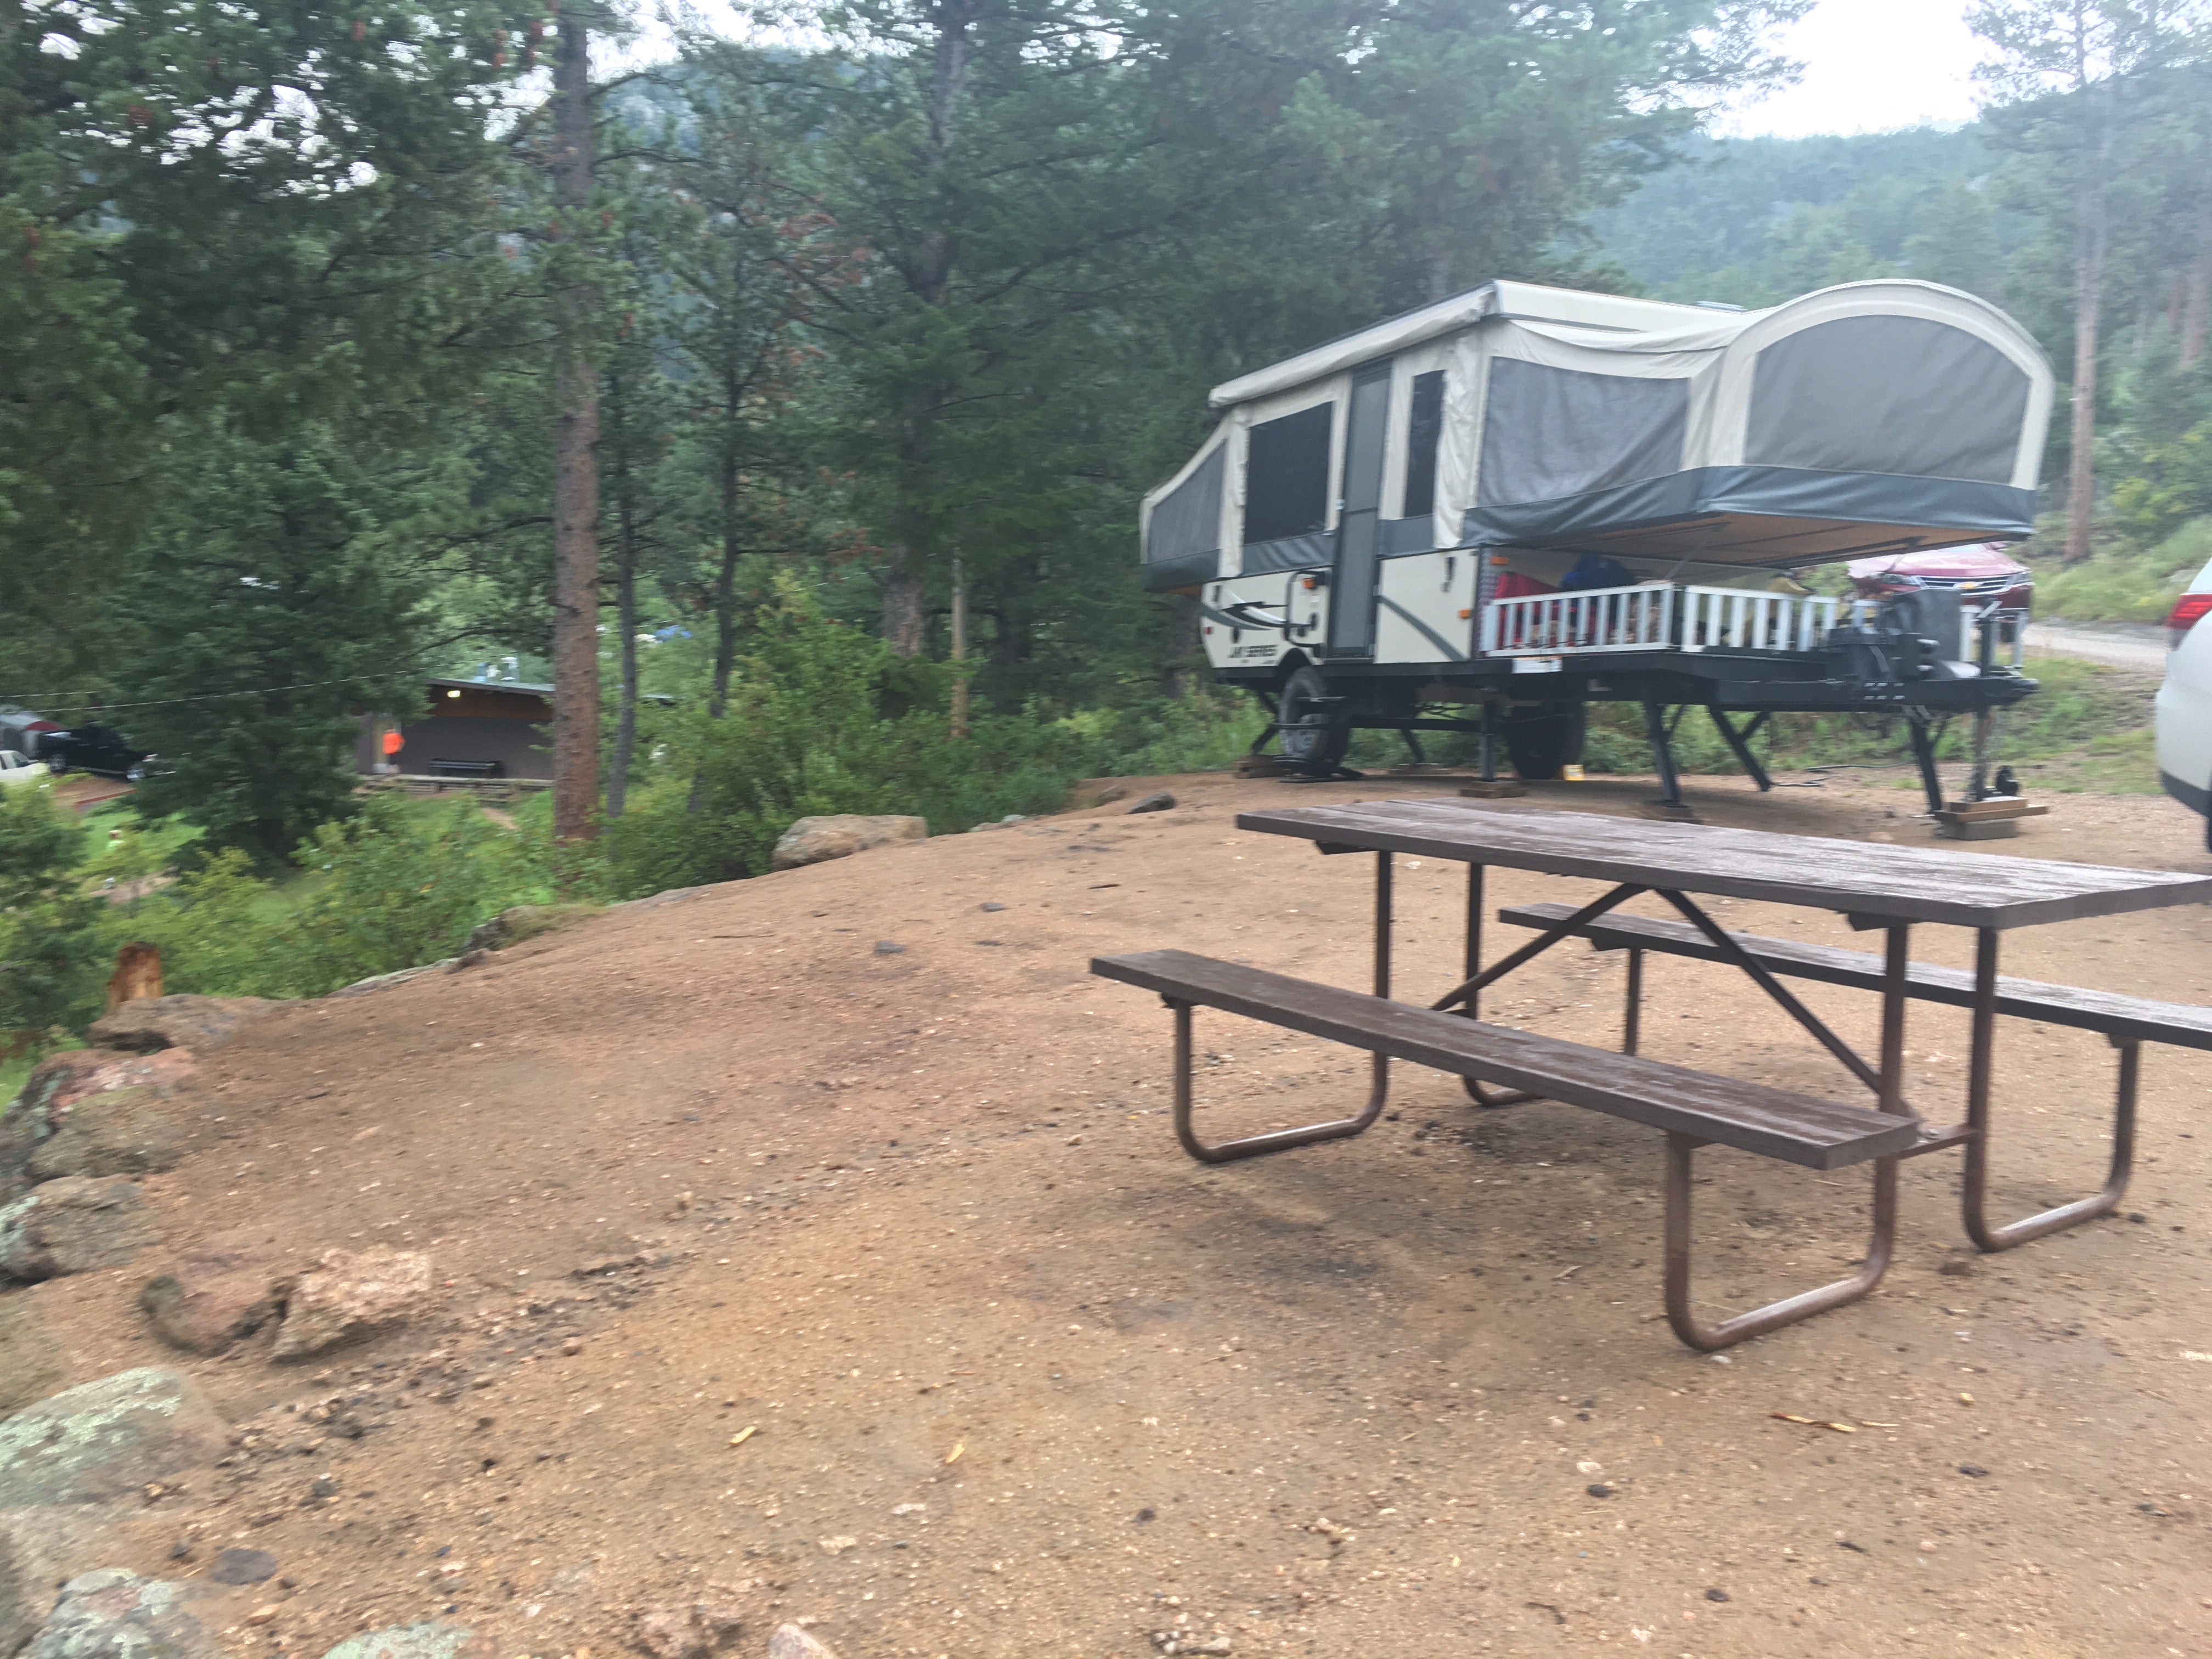 View of the campsite from the fire ring area.  Lots of chipmunks and golden mantle squirrels!